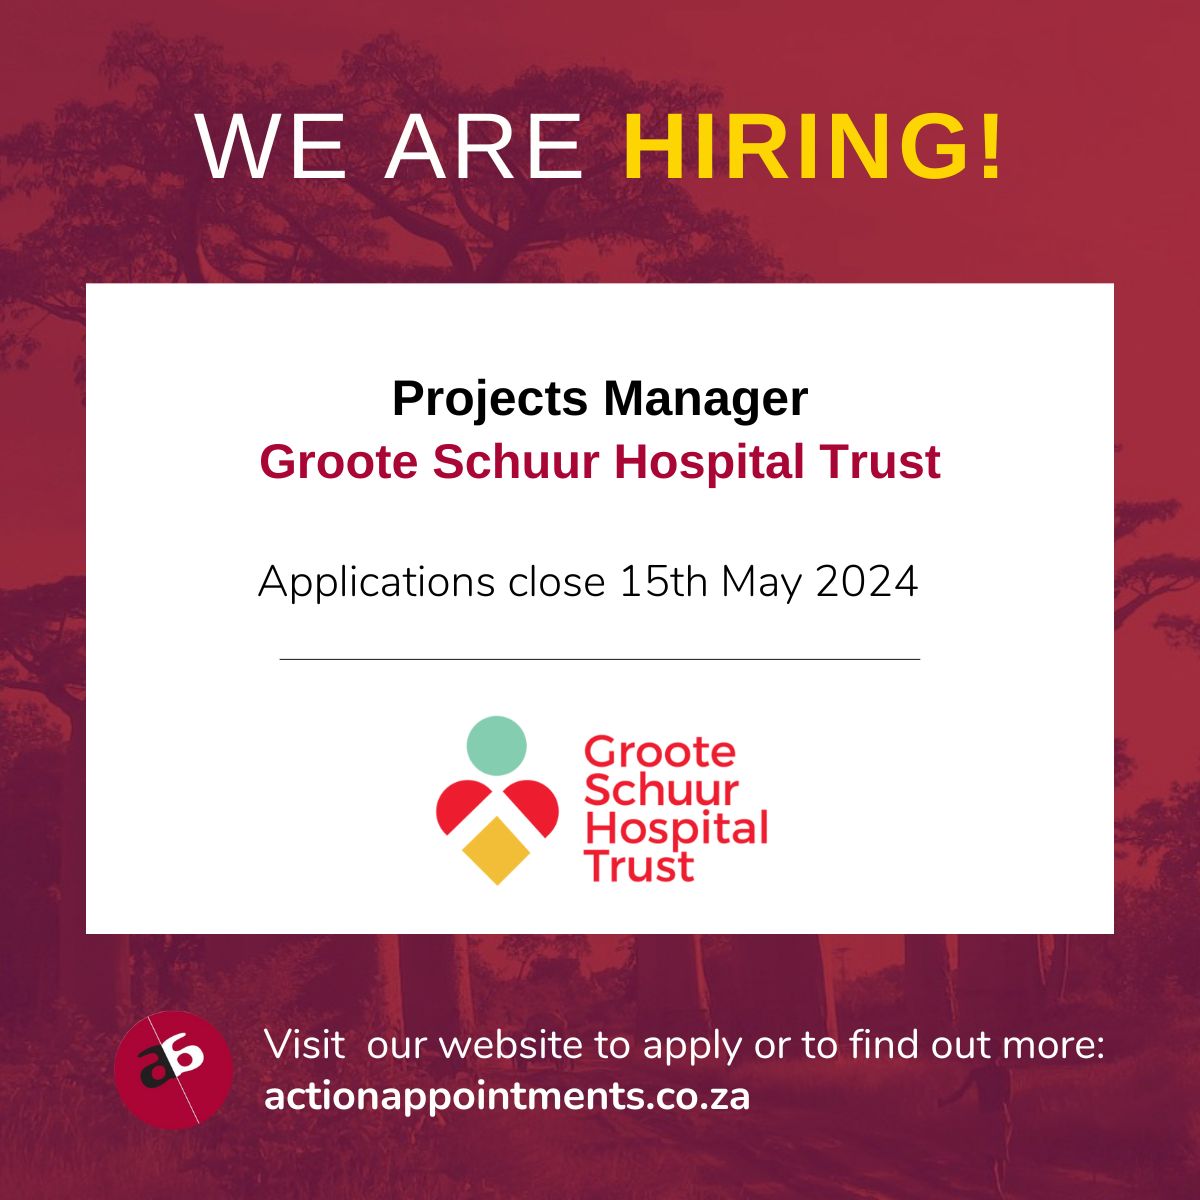 VACANCY! Action Appointments is recruiting a Projects Manager for @gsh_trust based in Observatory.

For more information, visit the link below:
actionappointments.co.za/vacancies/groo…

#hiring #projectsmanager #publichealth #development #staffmanagement #stakeholdermanagement #hybridjobs